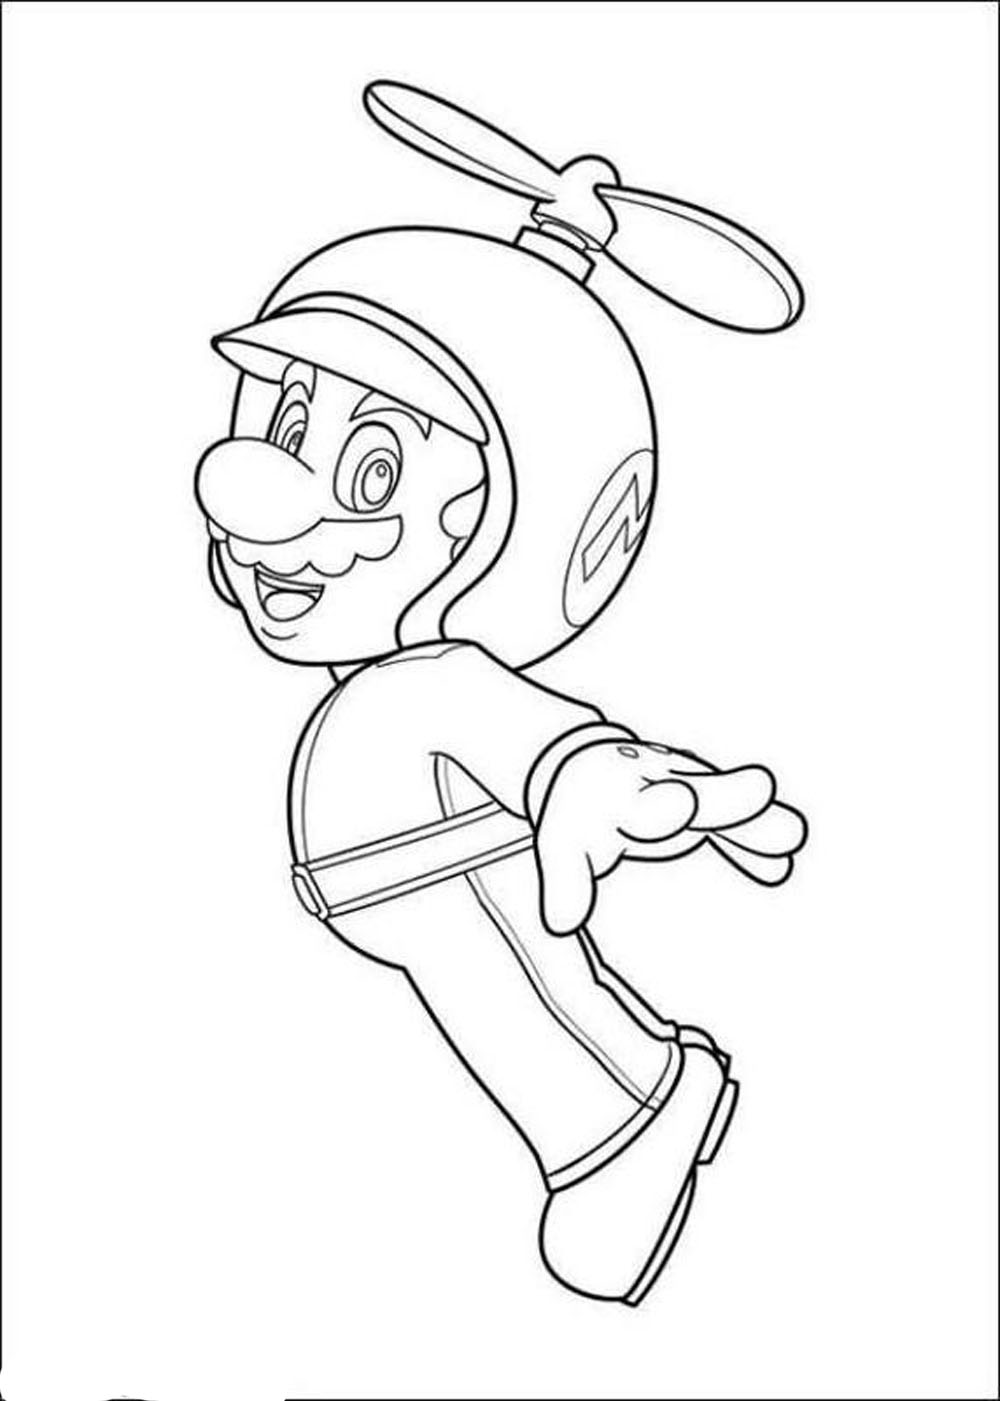 free printable mario coloring pages mario coloring pages themes best apps for kids coloring mario free printable pages 